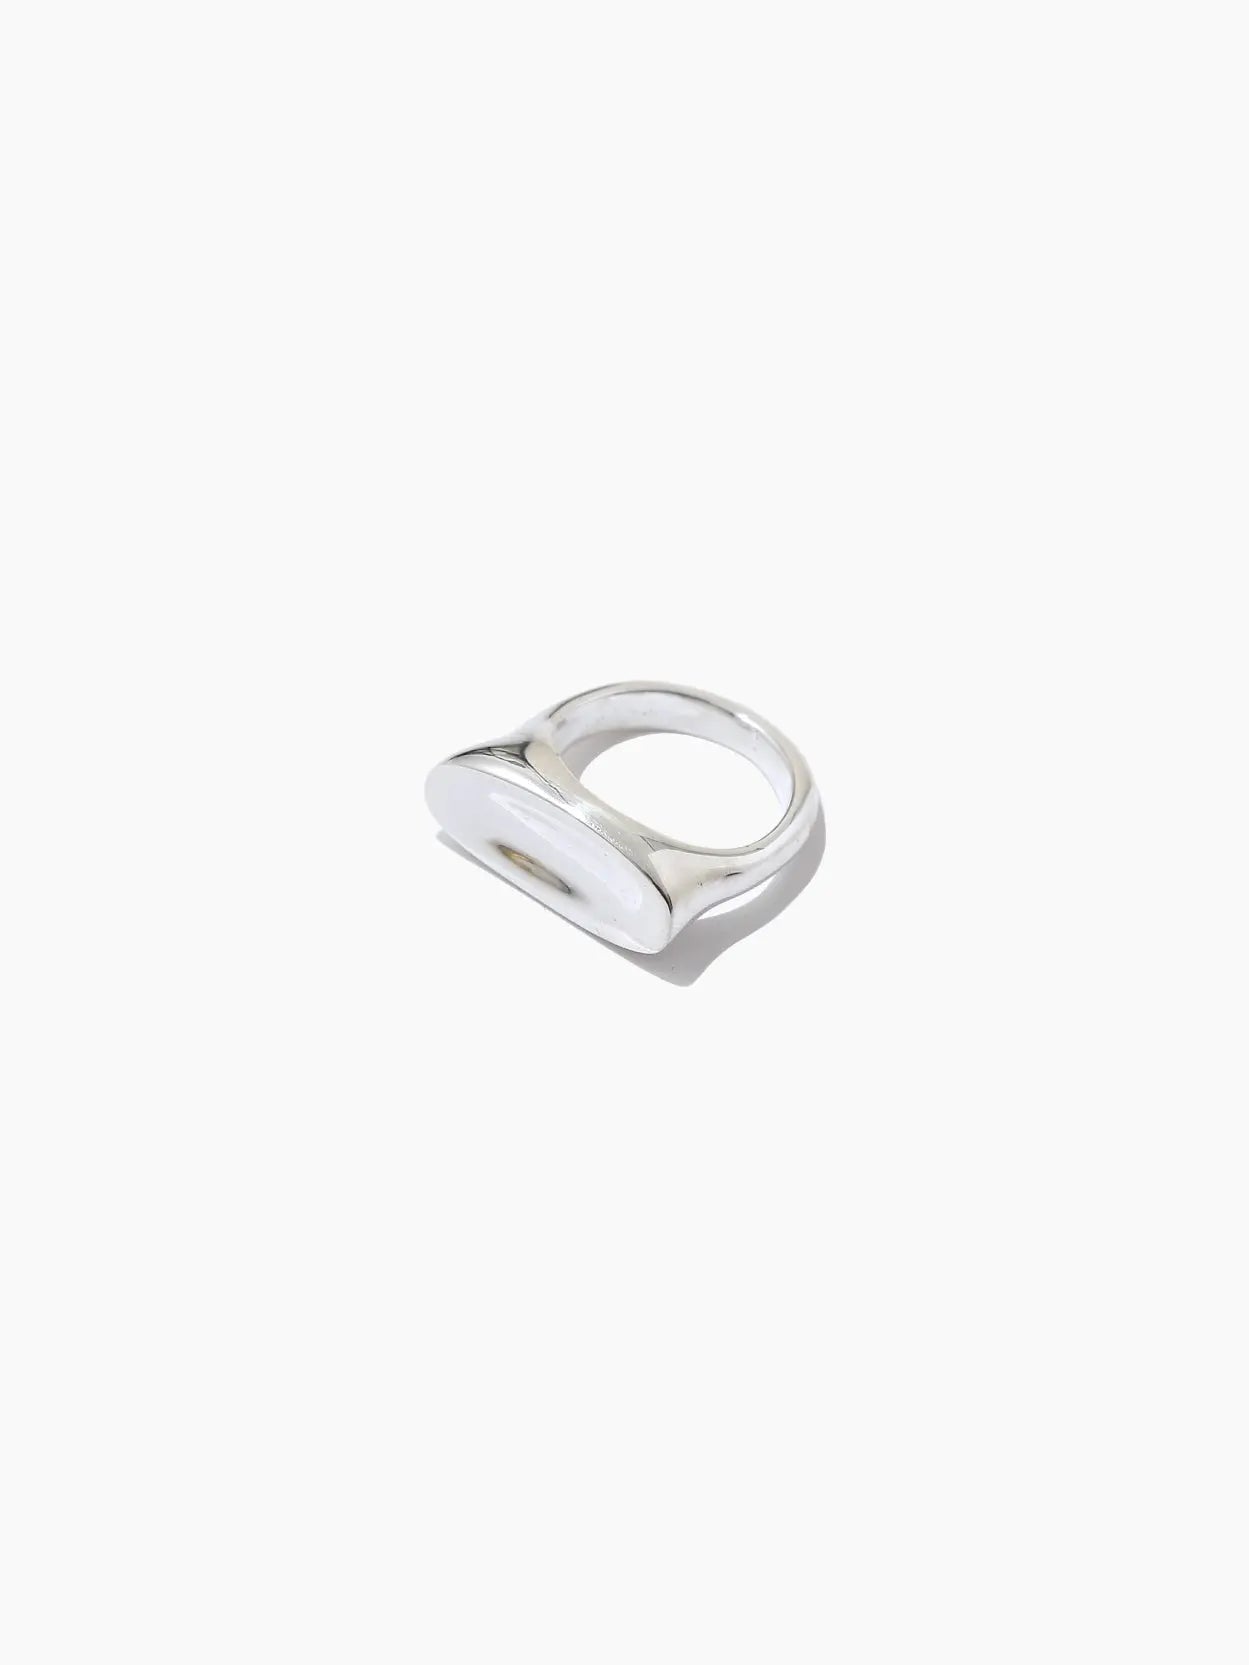 A modern silver ring with a wide, flat top surface displayed against a plain white background, the Fava Ring by Nathalie Schreckenberg is available exclusively at Bassalstore.